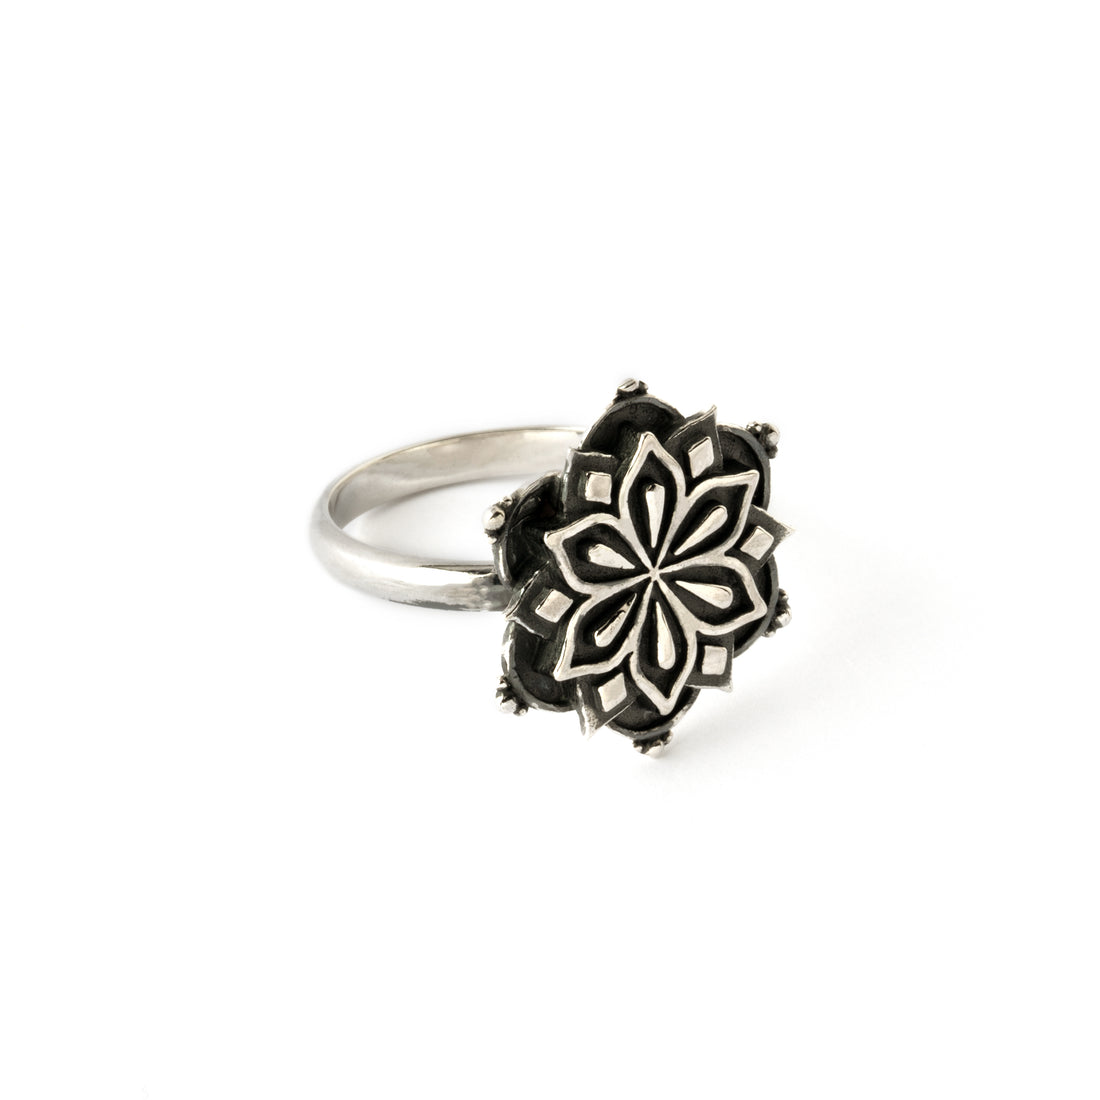 Sadhana silver ring right side view